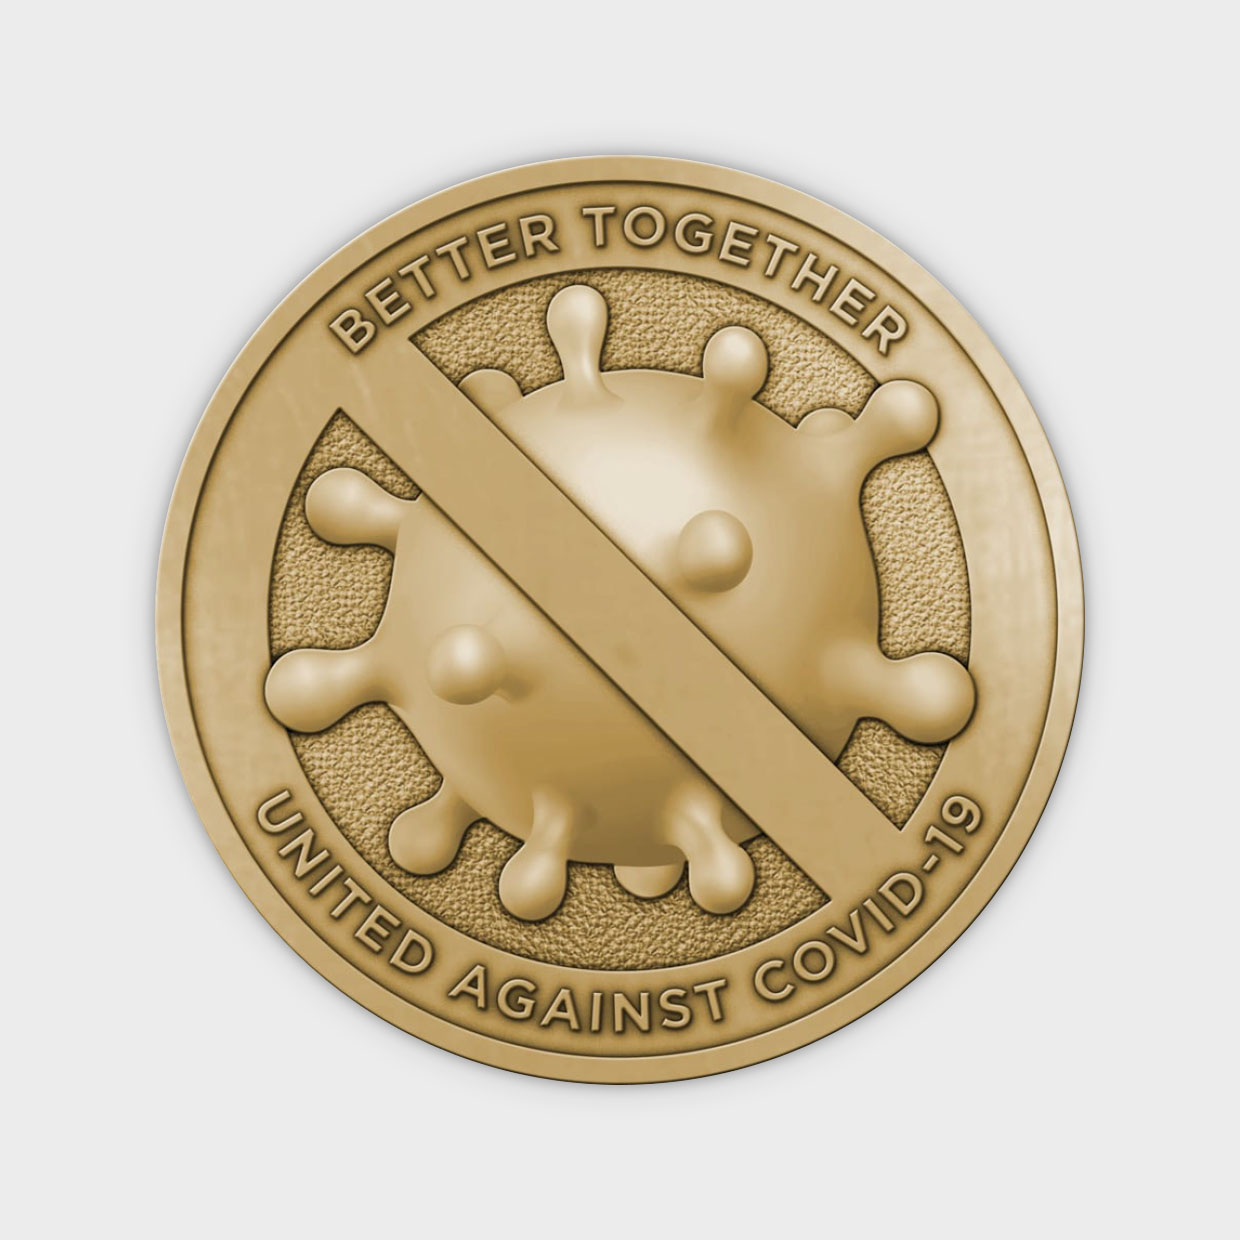 United Against COVID-19 Coin